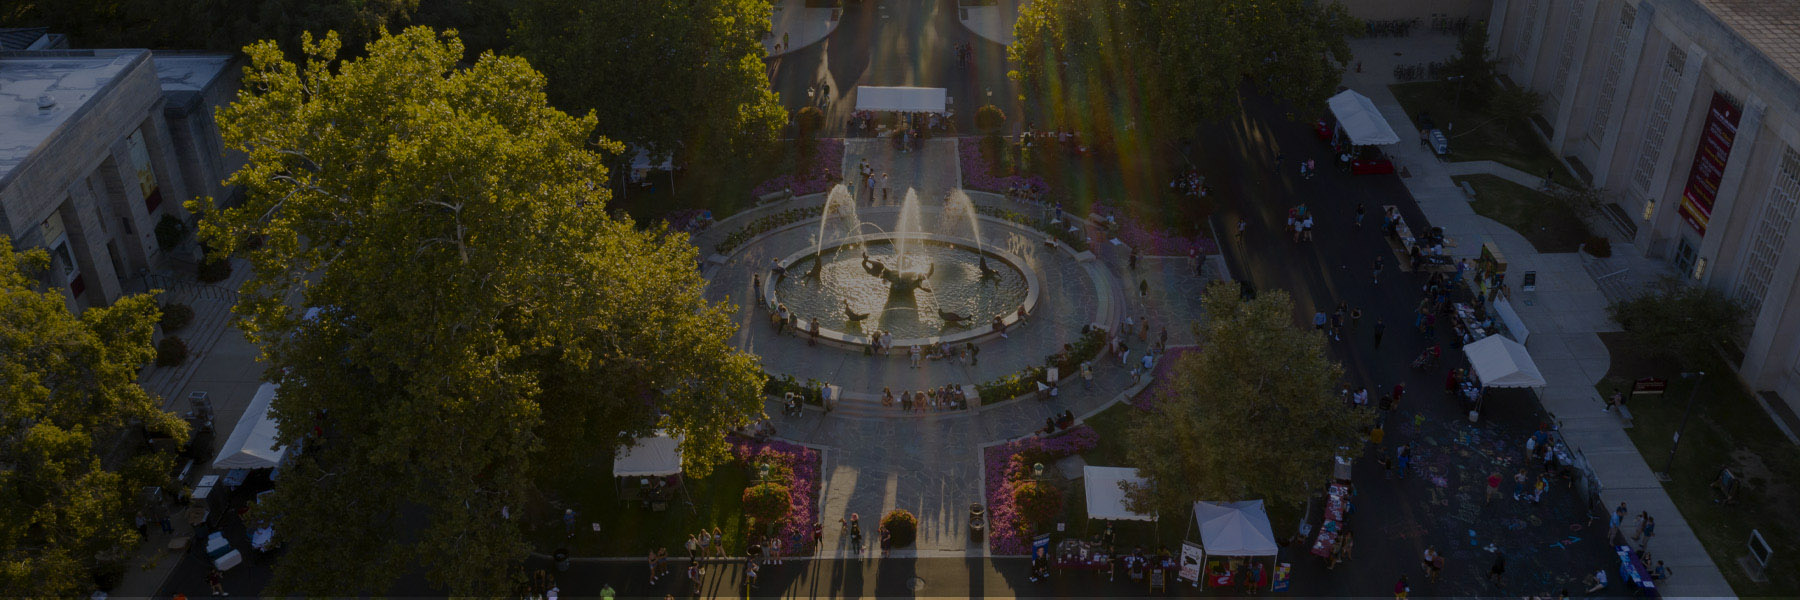 Arial view of showalter fountain